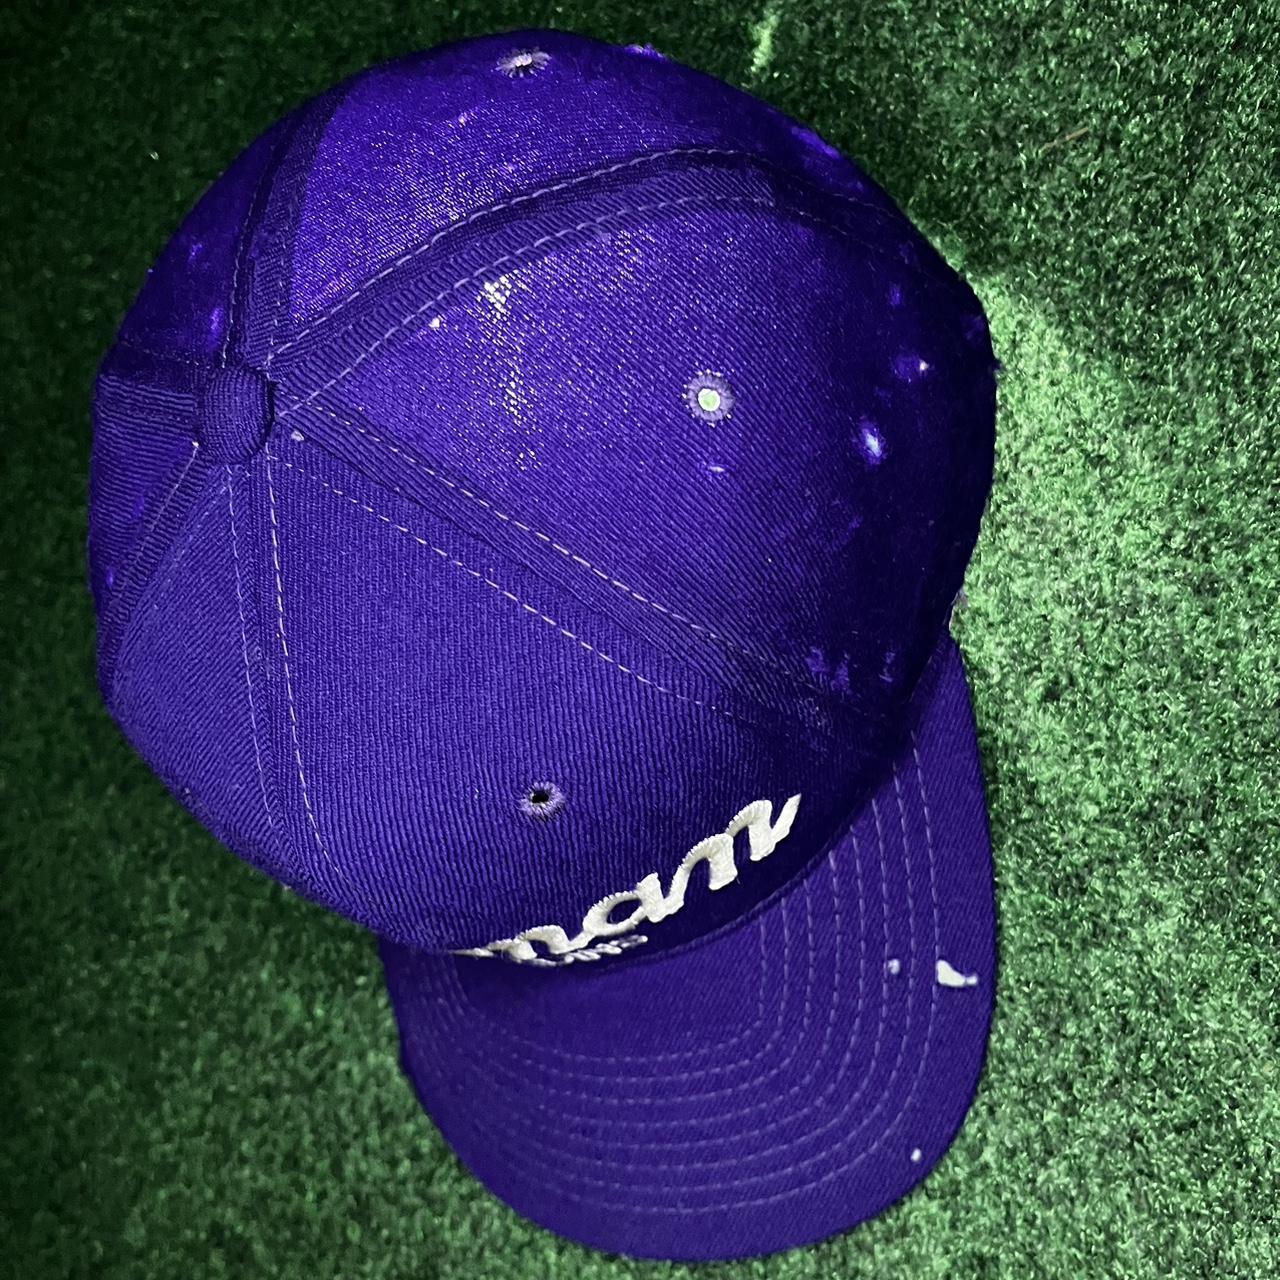 Sports Specialties Men's Purple and White Hat (8)